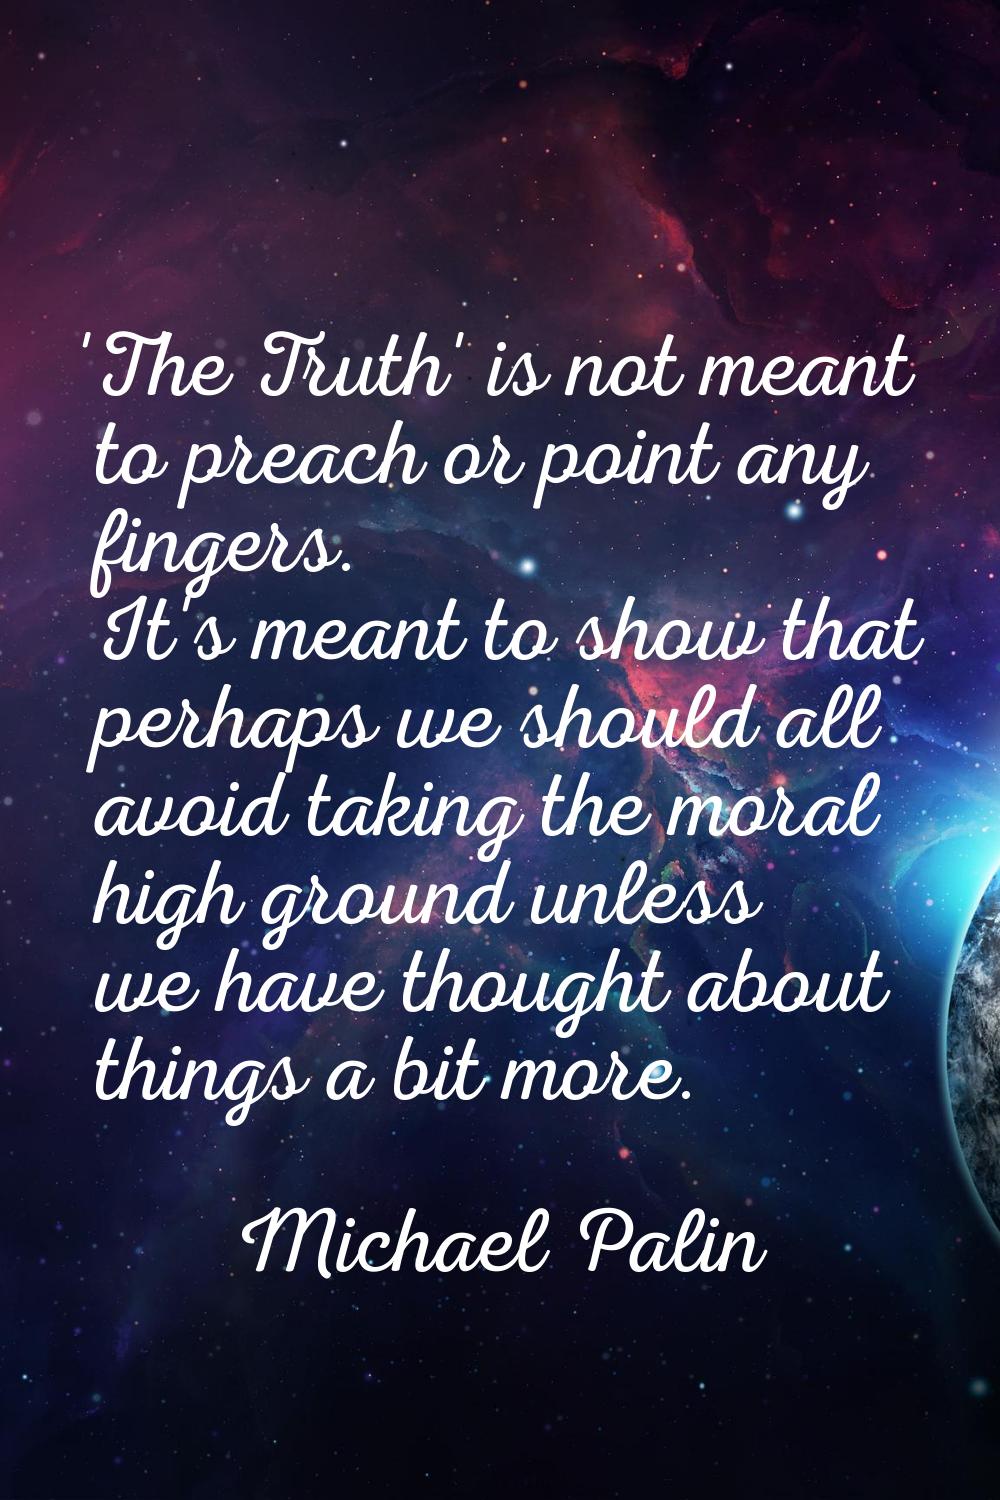 'The Truth' is not meant to preach or point any fingers. It's meant to show that perhaps we should 